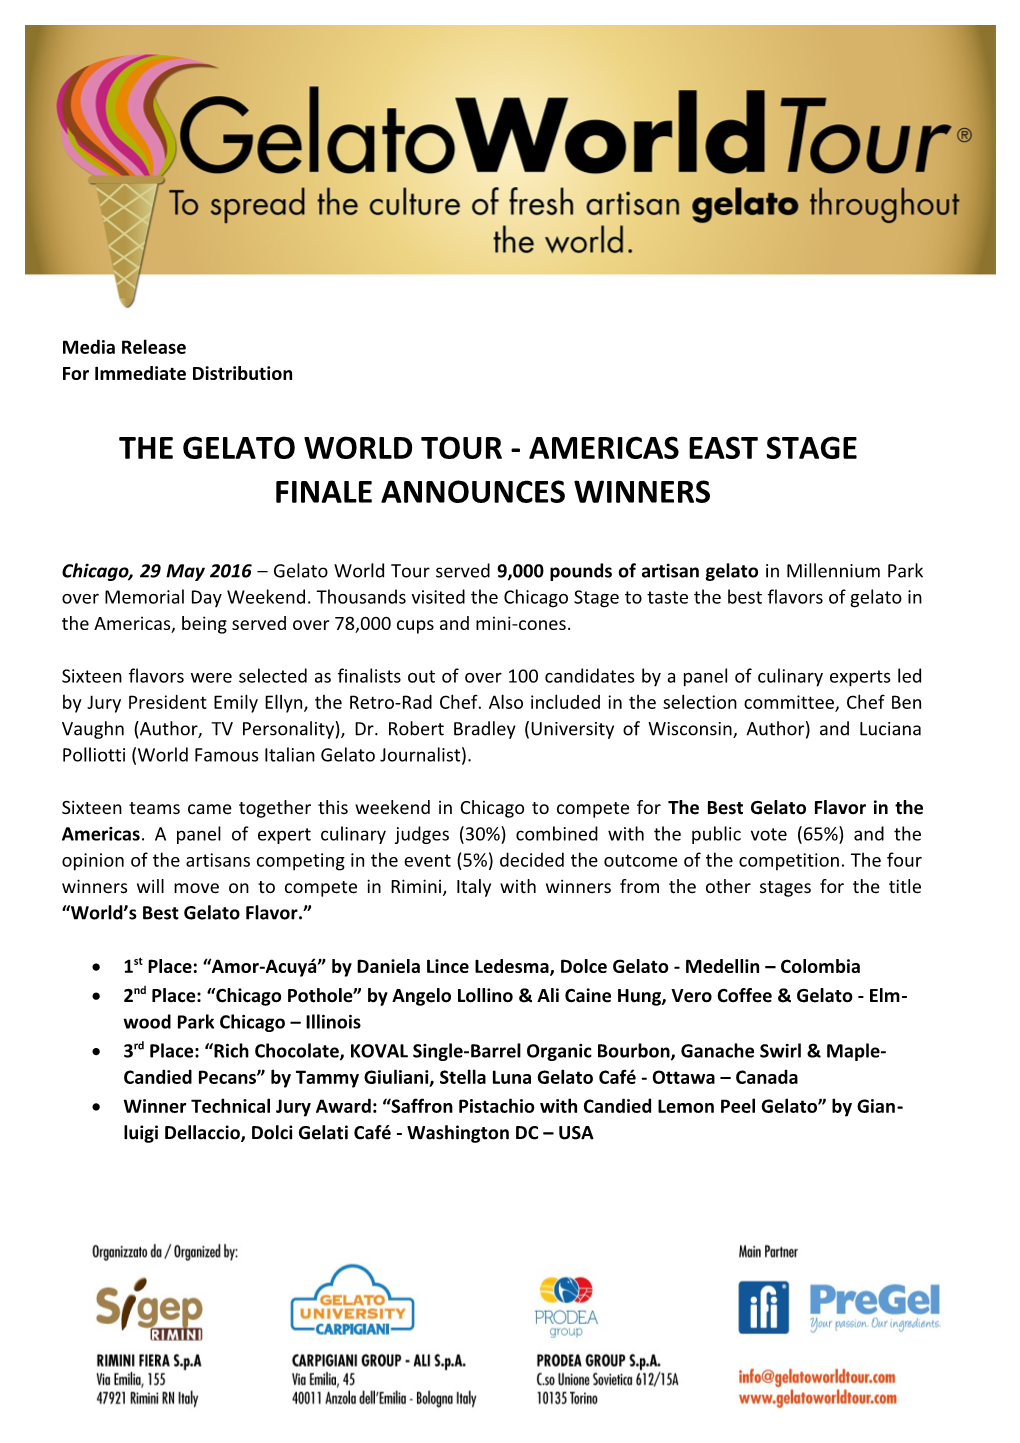 The Gelato World Tour - Americas East Stage